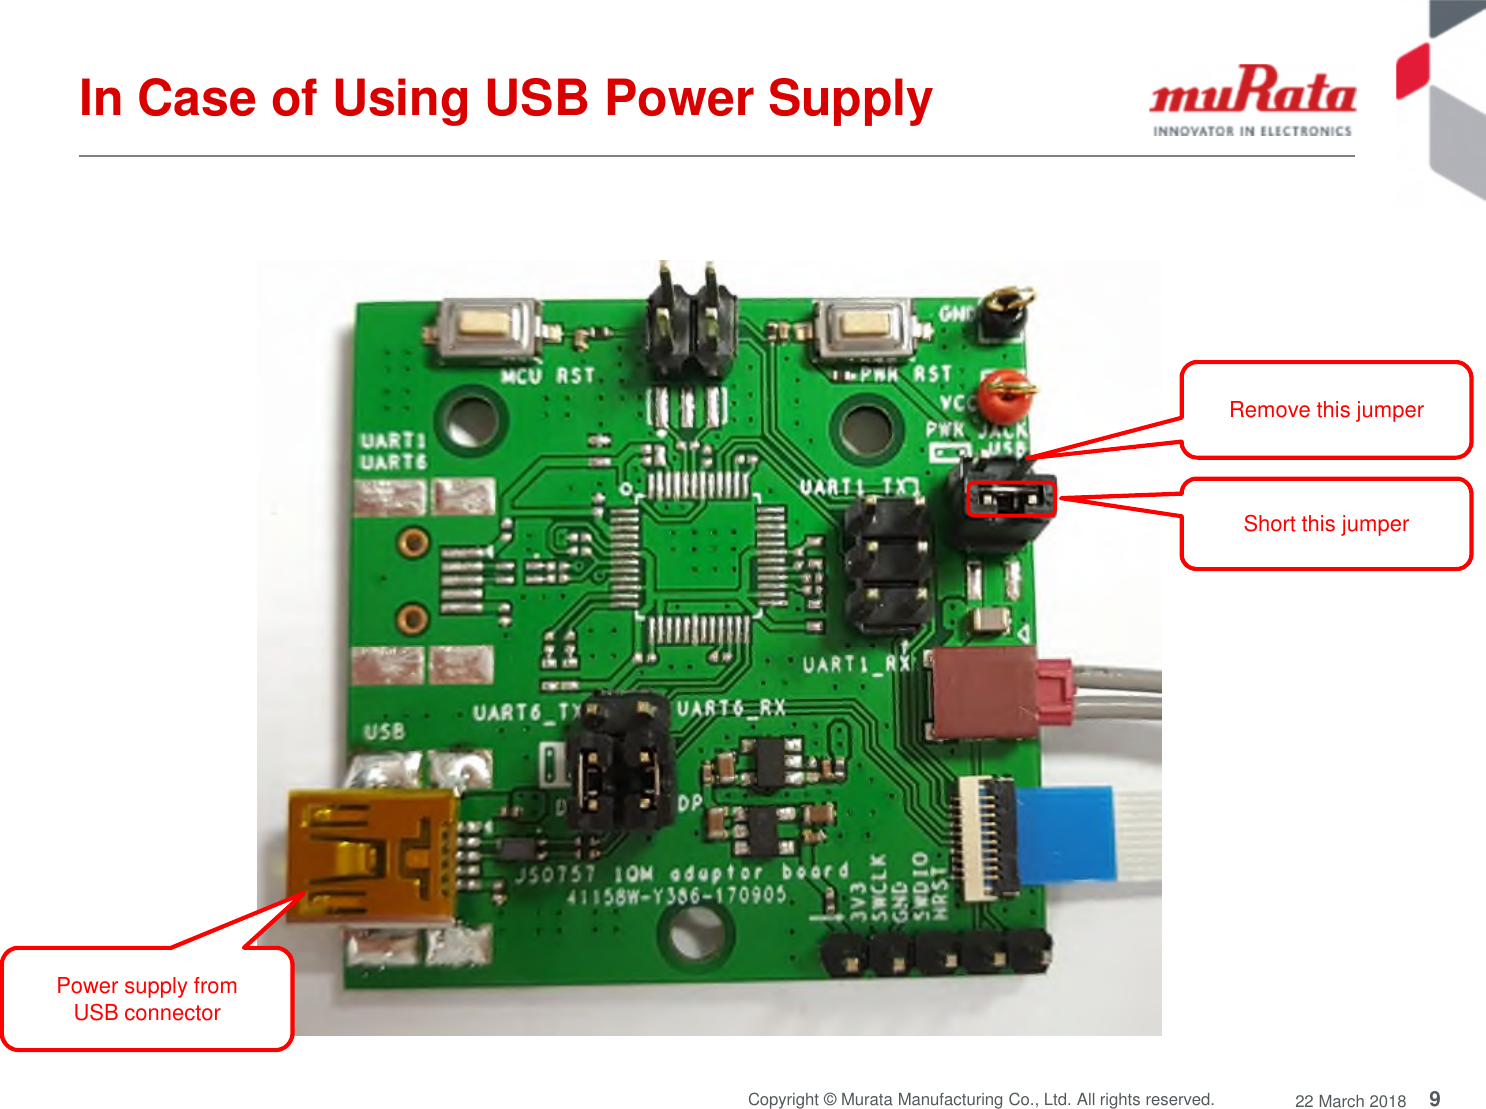 9Copyright © Murata Manufacturing Co., Ltd. All rights reserved. 22 March 2018In Case of Using USB Power SupplyShort this jumperPower supply fromUSB connectorRemove this jumper